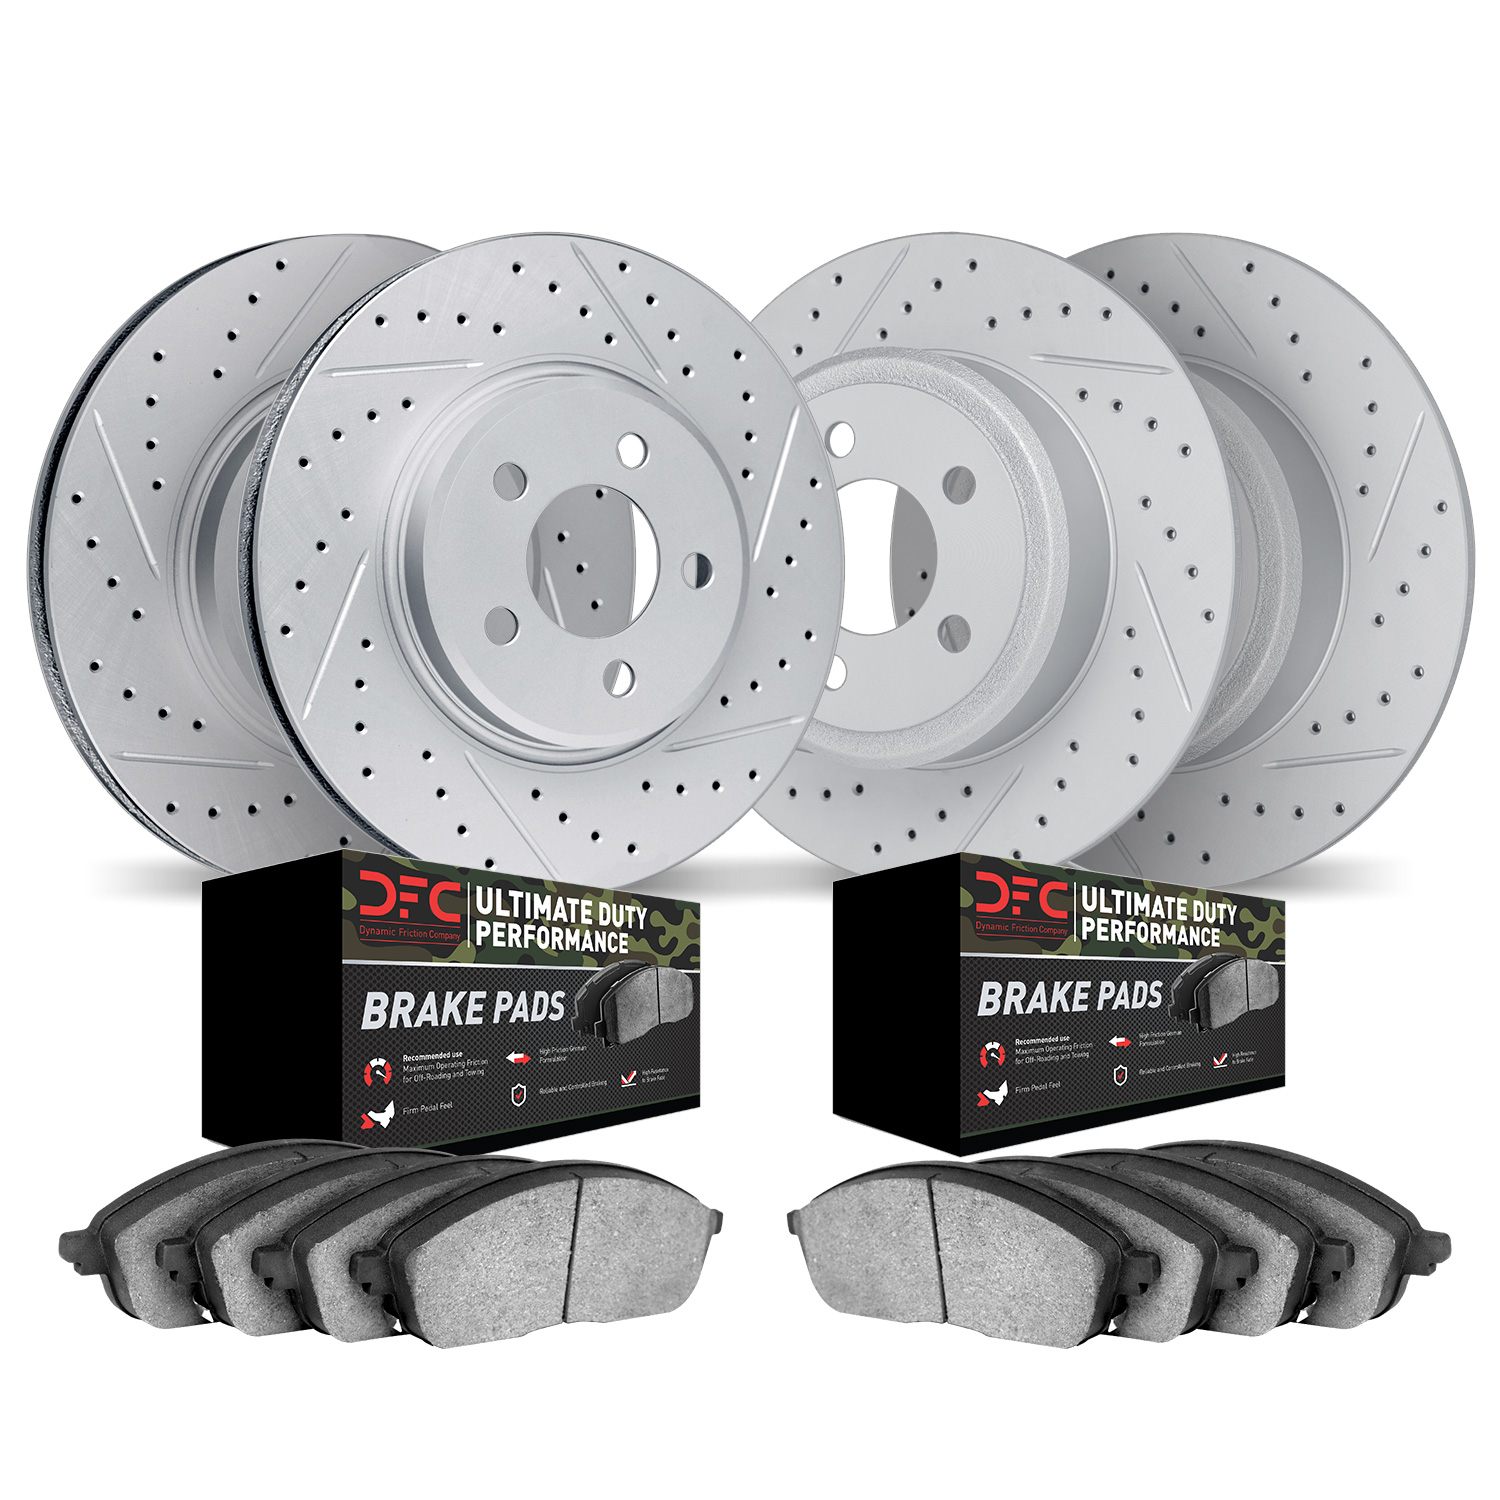 2404-42017 Geoperformance Drilled/Slotted Brake Rotors with Ultimate-Duty Brake Pads Kit, 2012-2018 Mopar, Position: Front and R